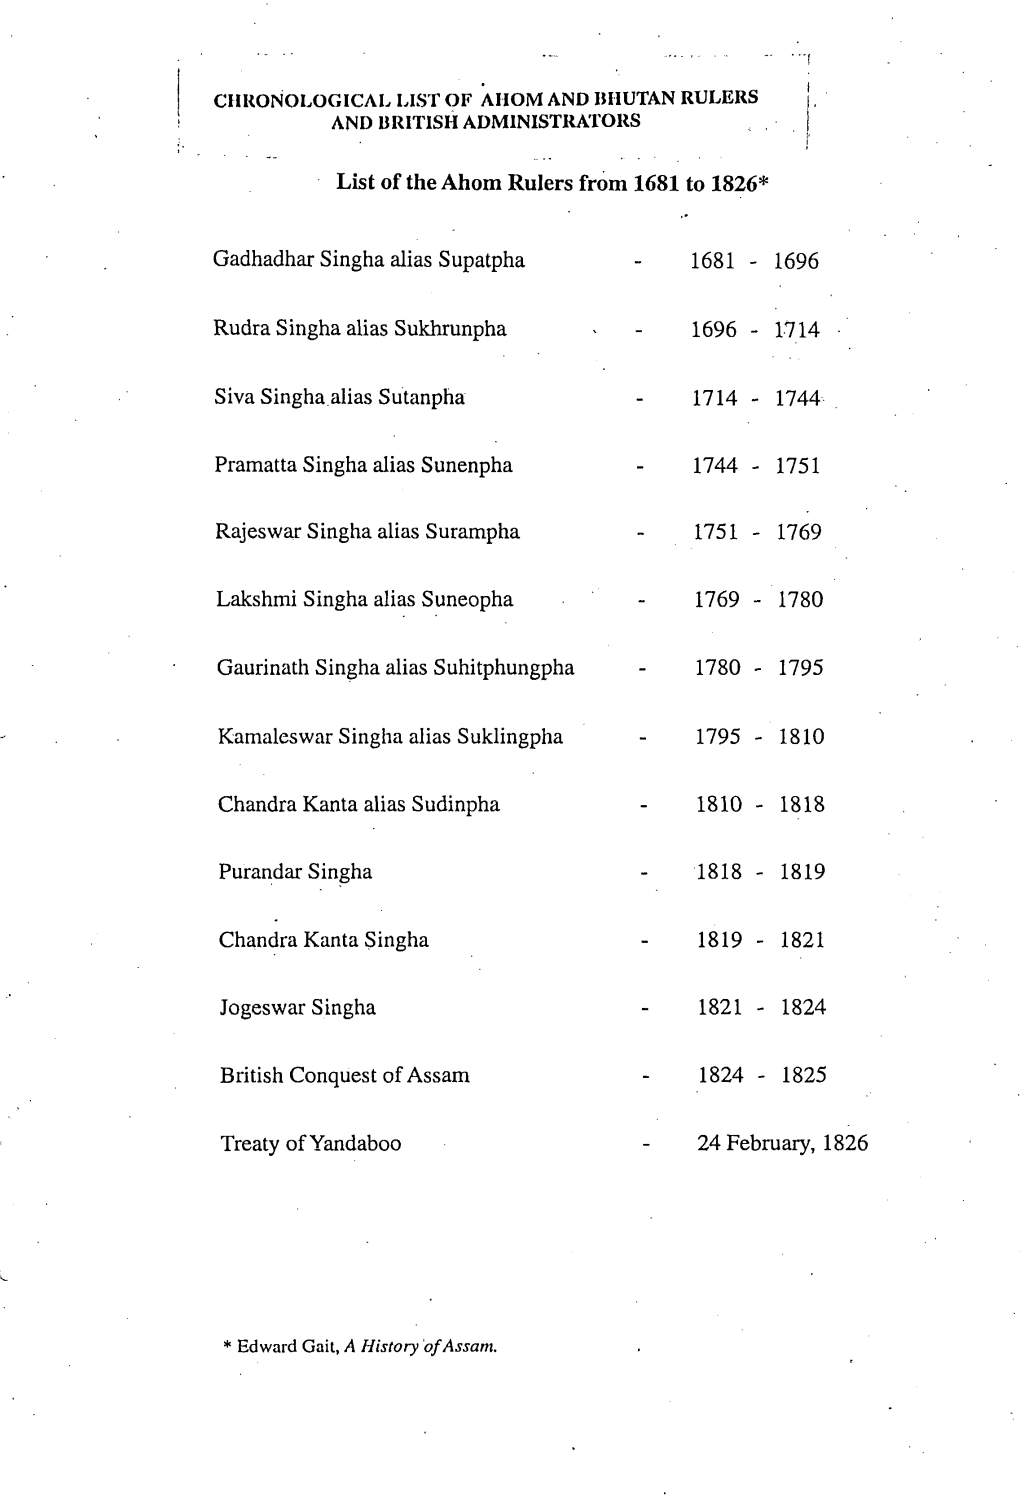 List of the Ahom Rulers from 1681 to 1826* Gadhadhar Singha Alias